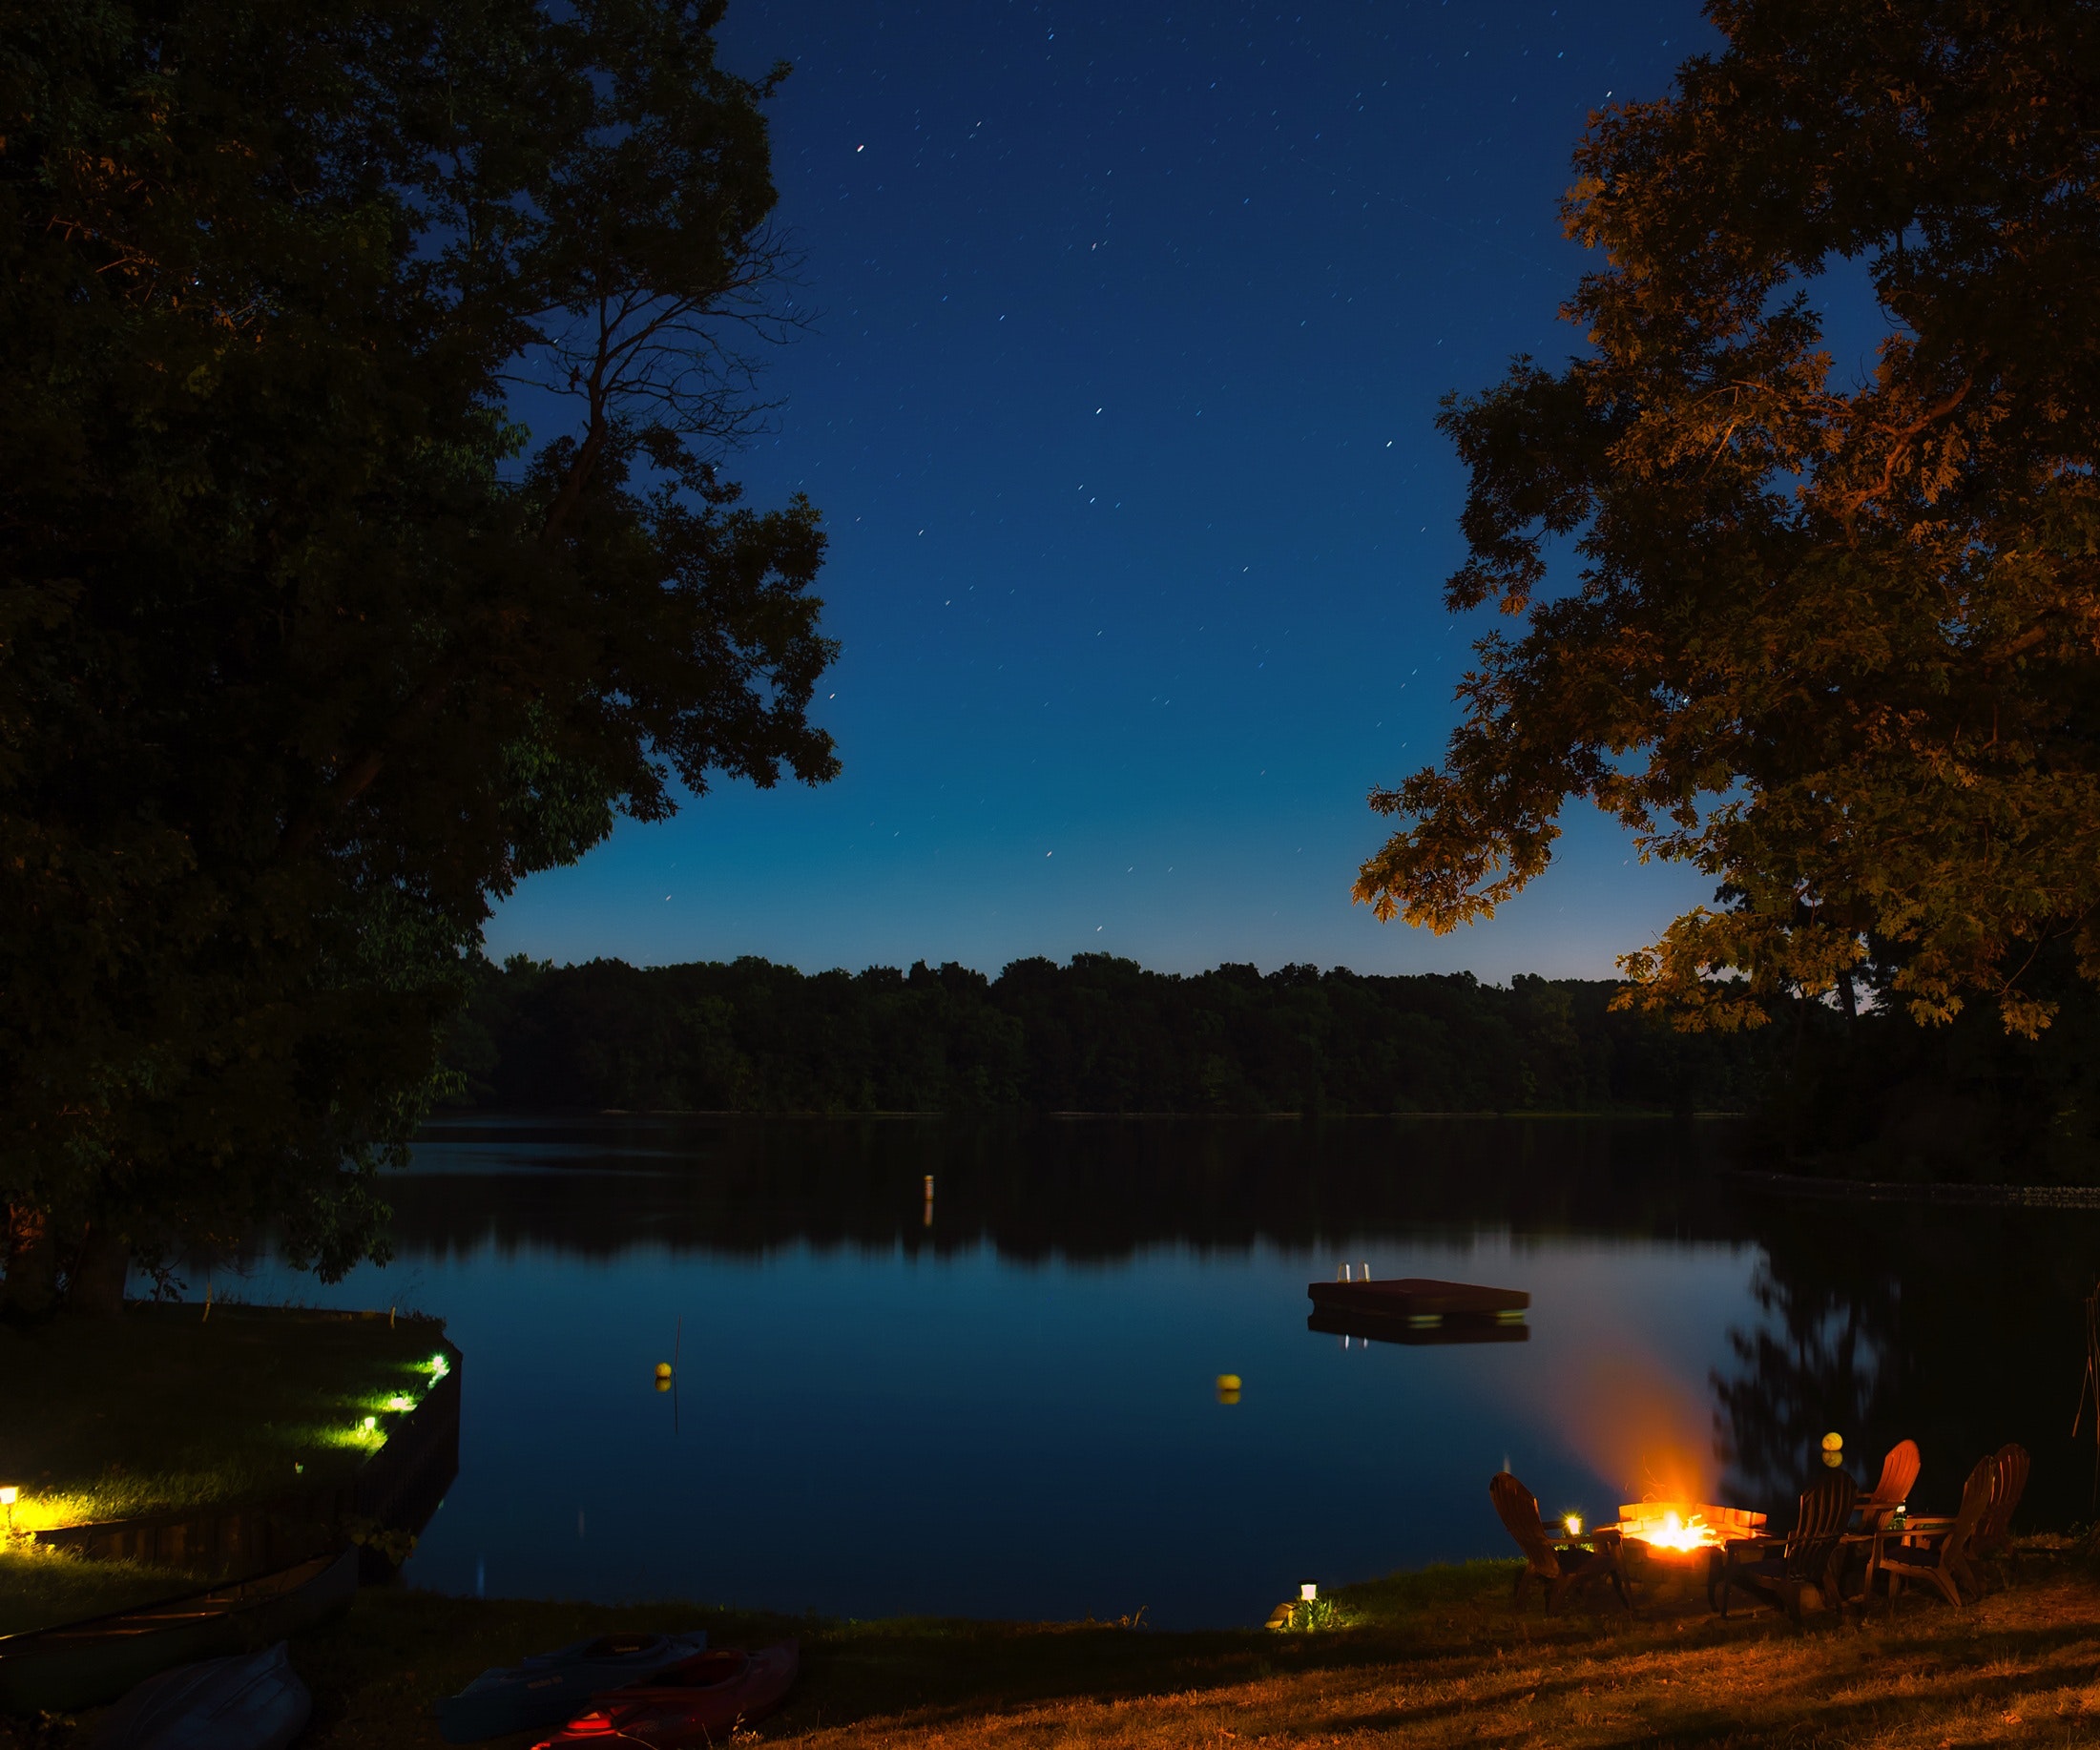 Sea body of water near trees during nighttime photo